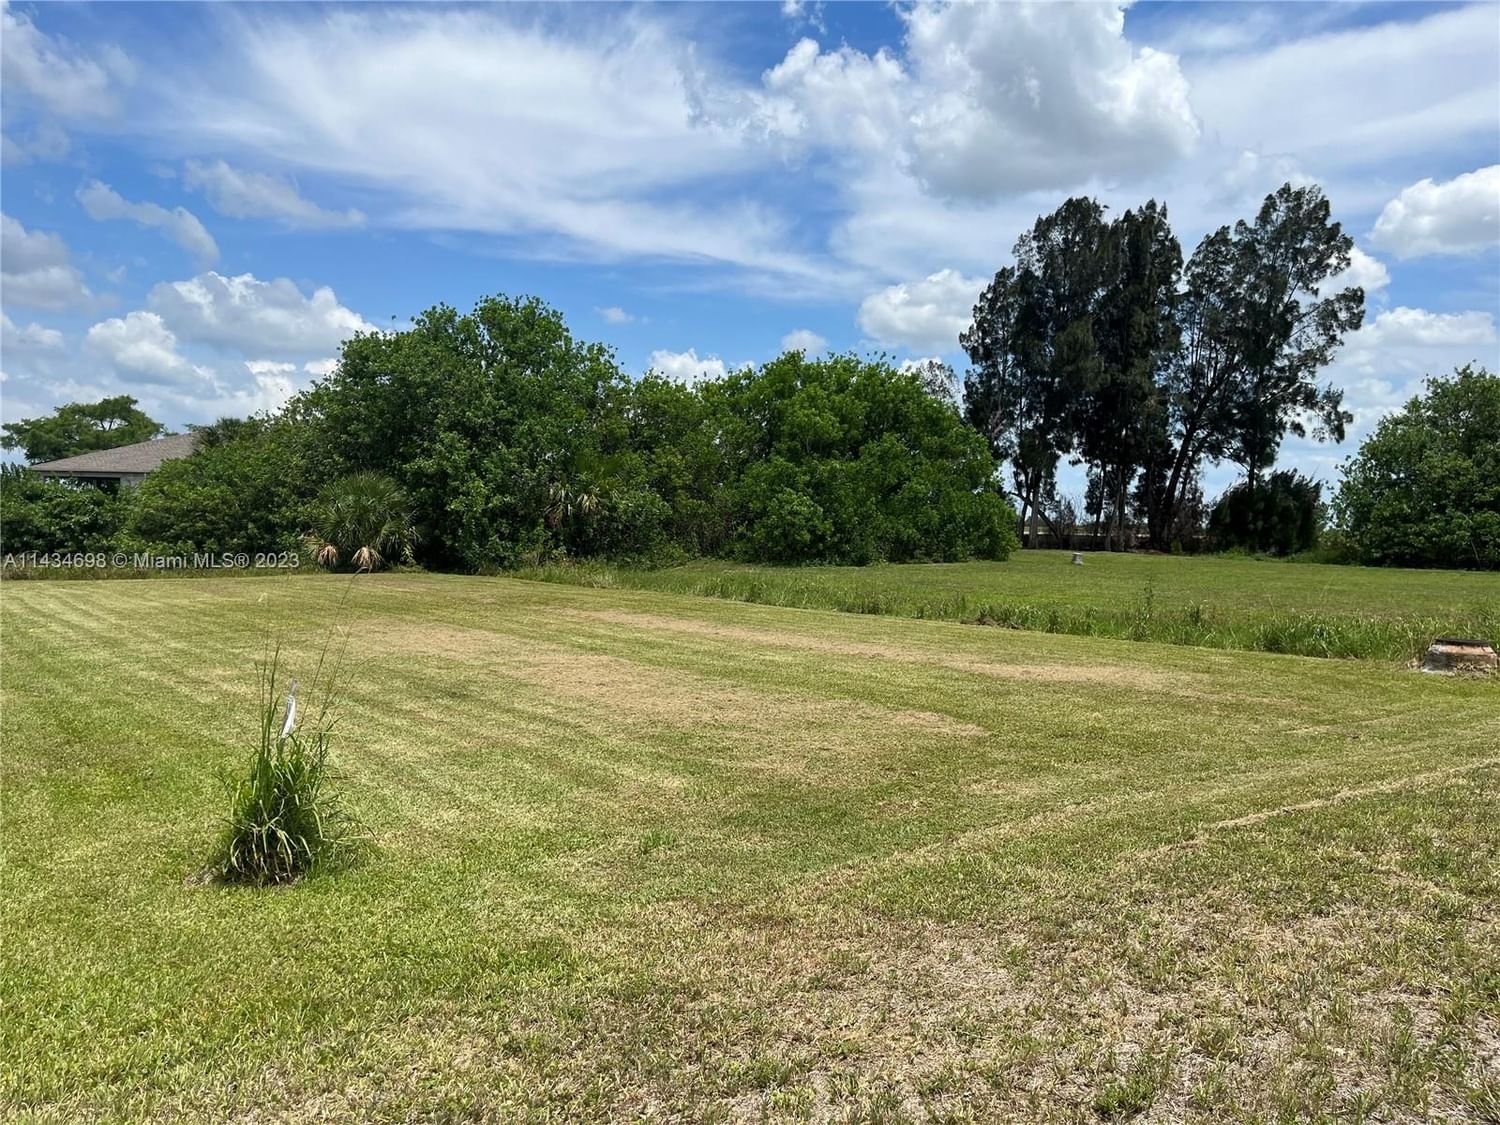 Real estate property located at 938 Meyerchick Dr, Glades County, Moore Haven, FL